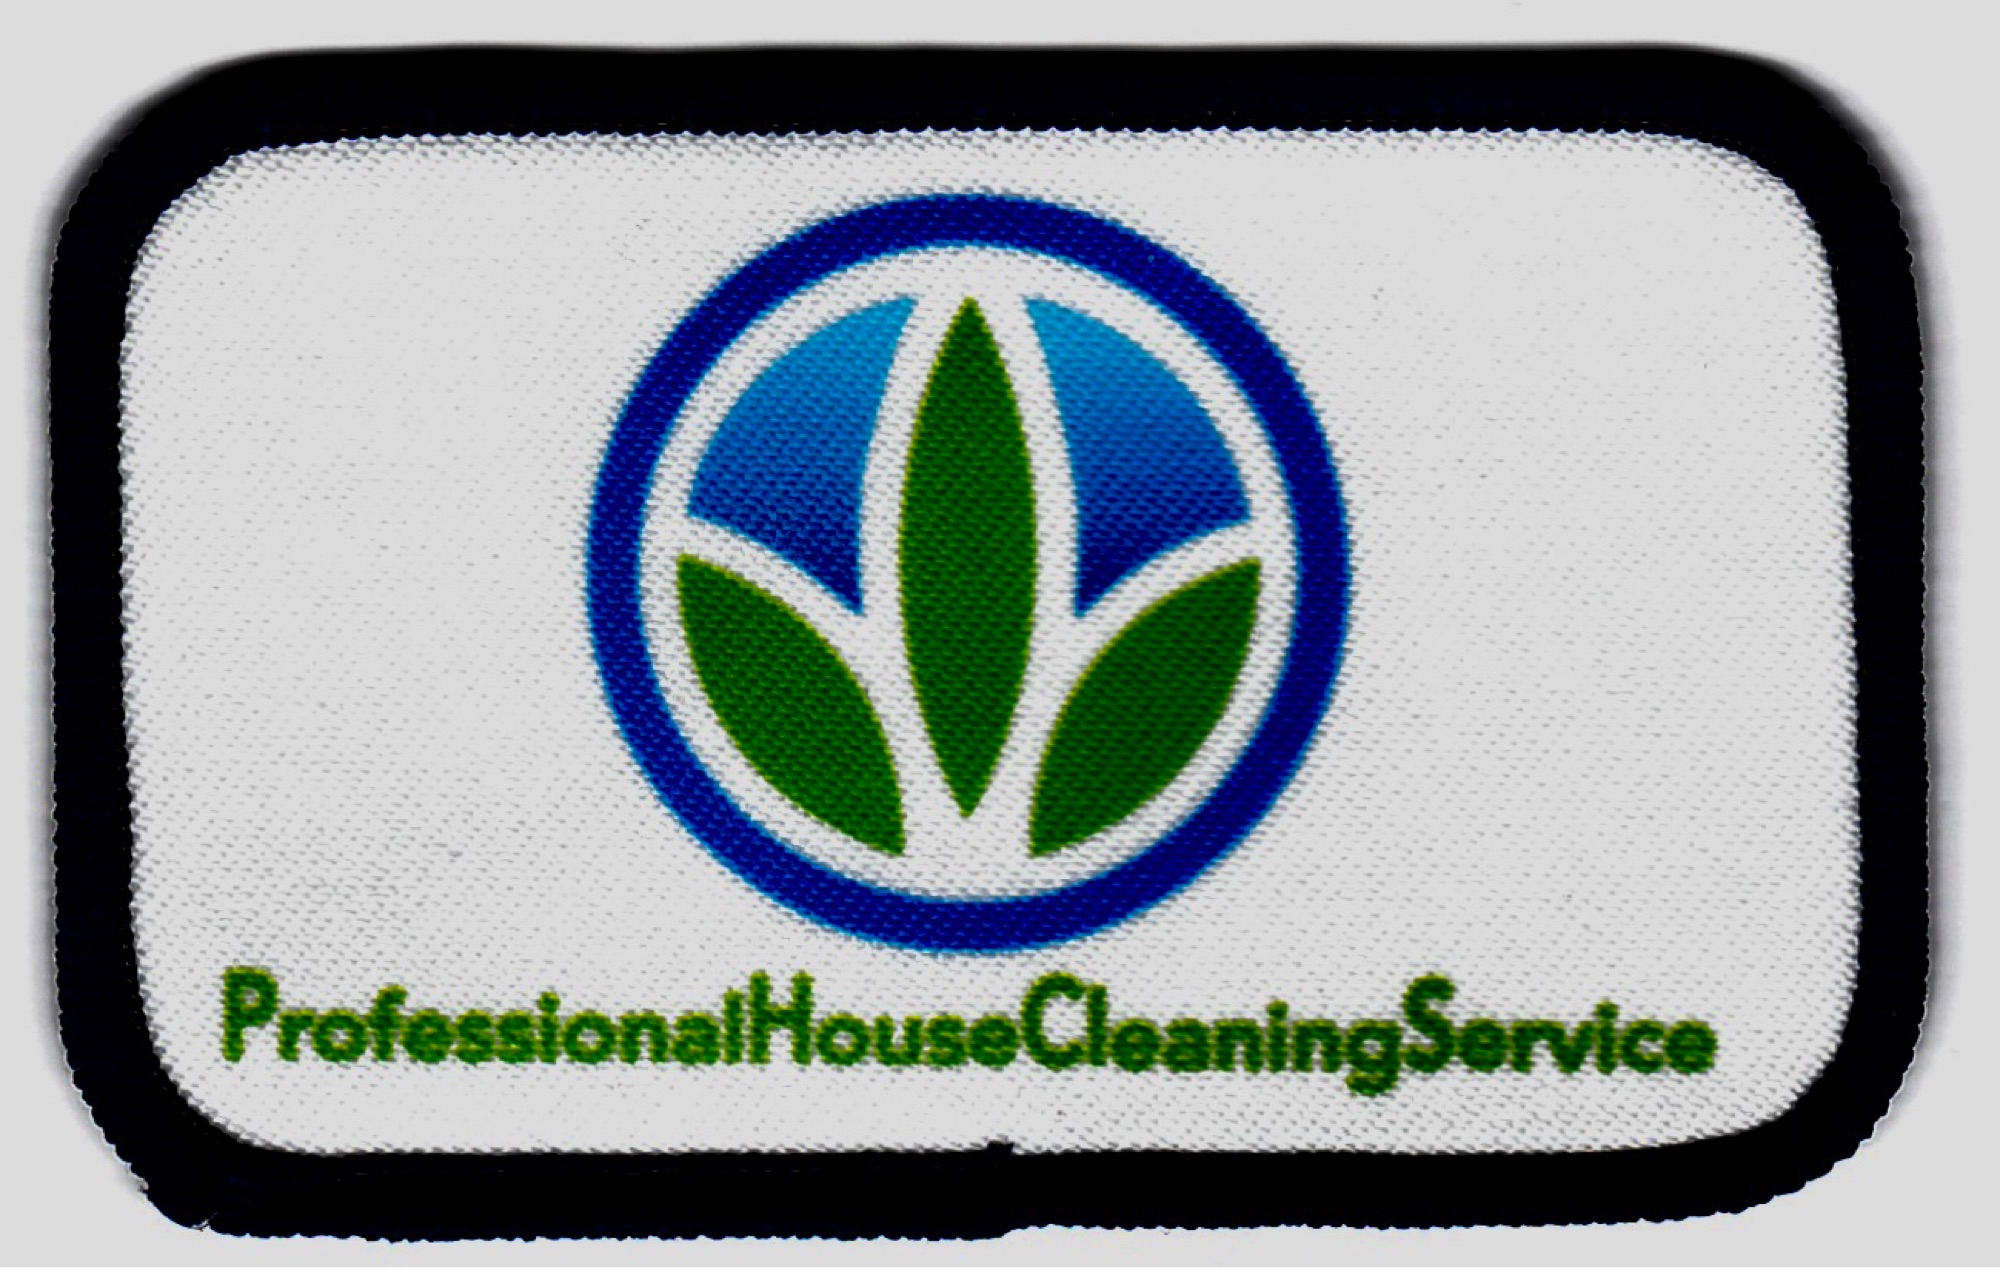 Professional House Cleaning Service, LLC Logo